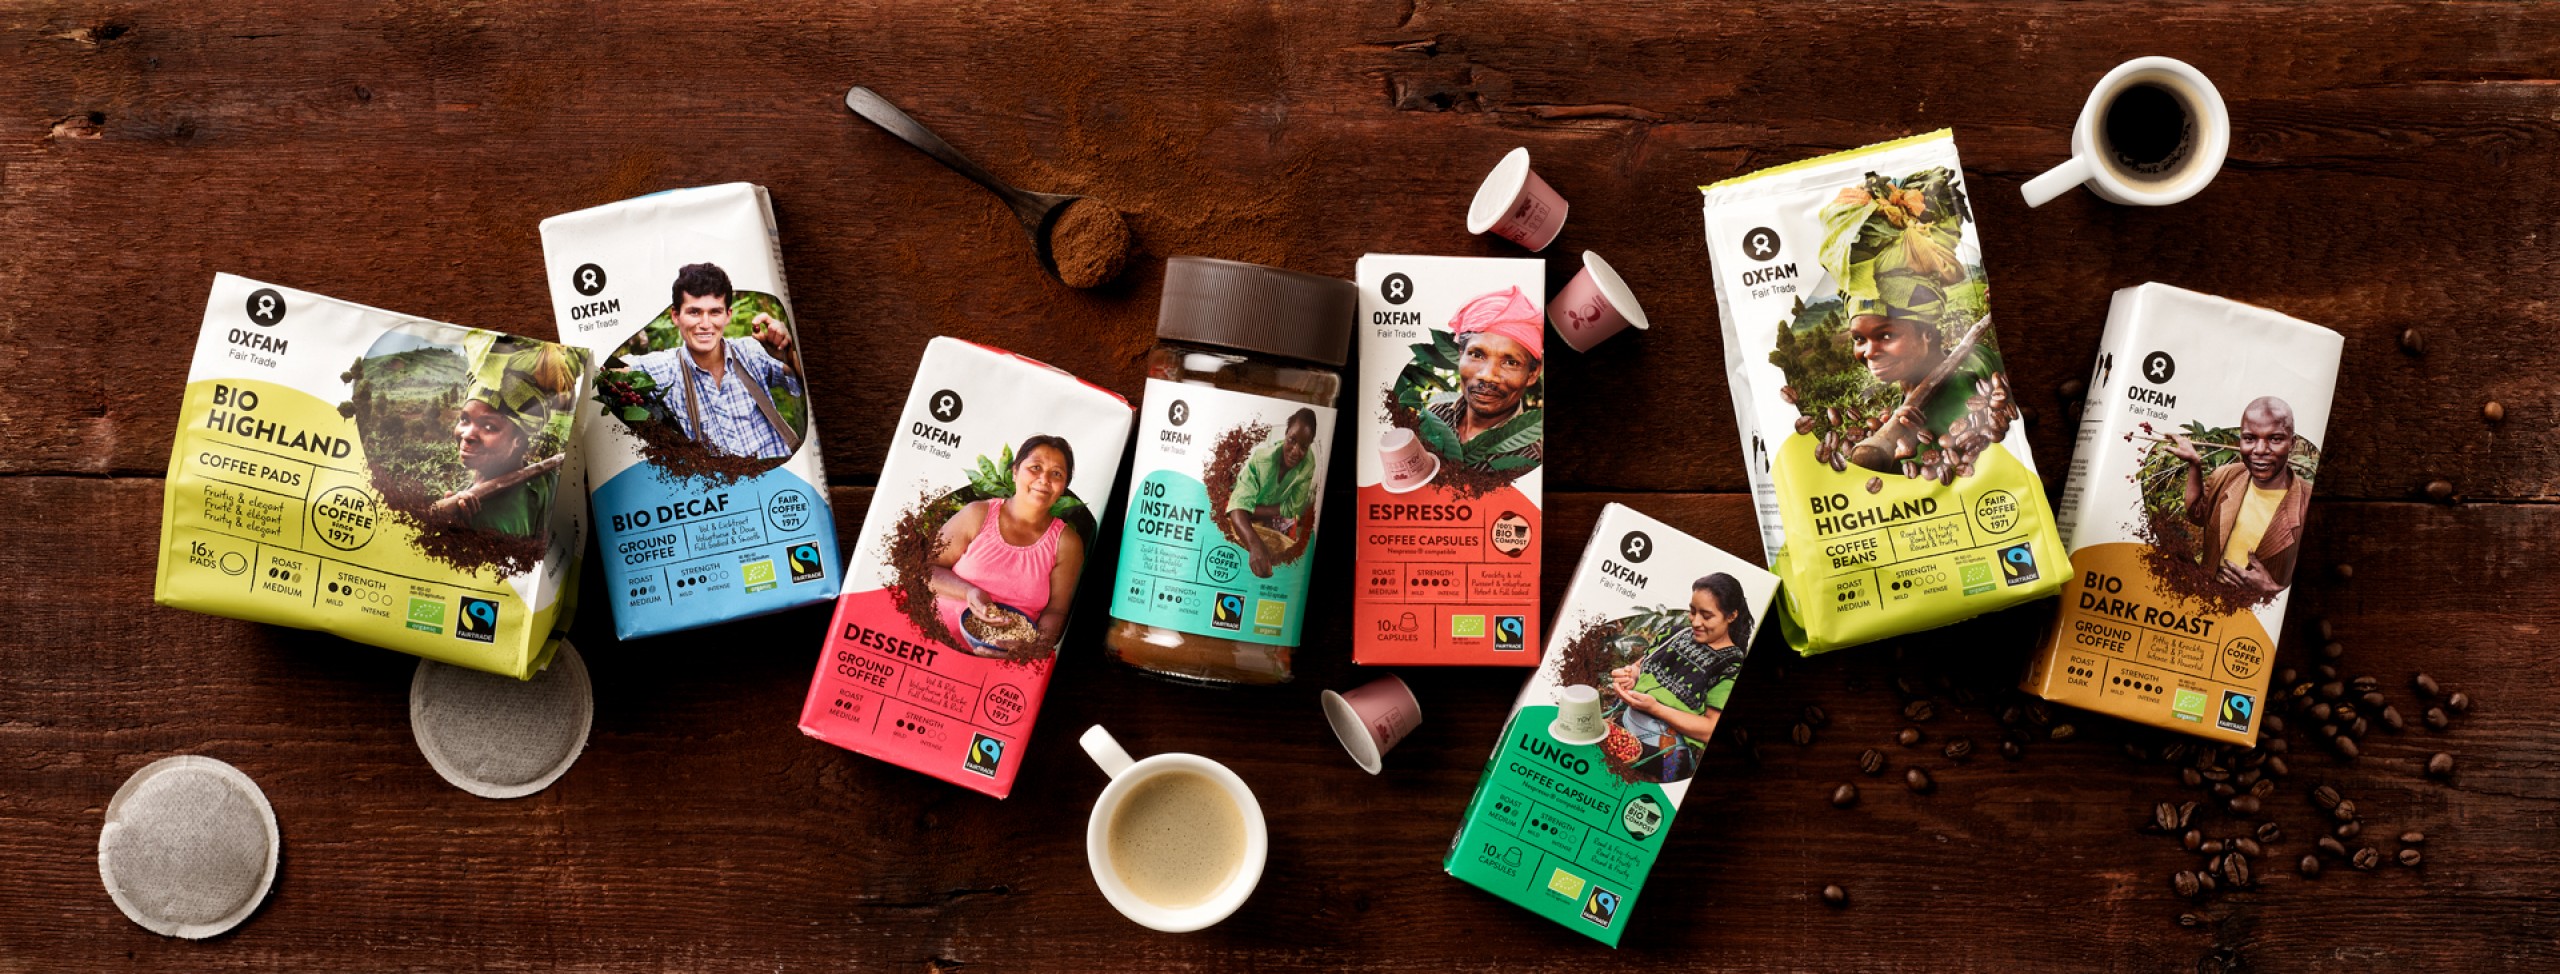 Quatre Mains package design - Package design oxfam, restyling, coffee